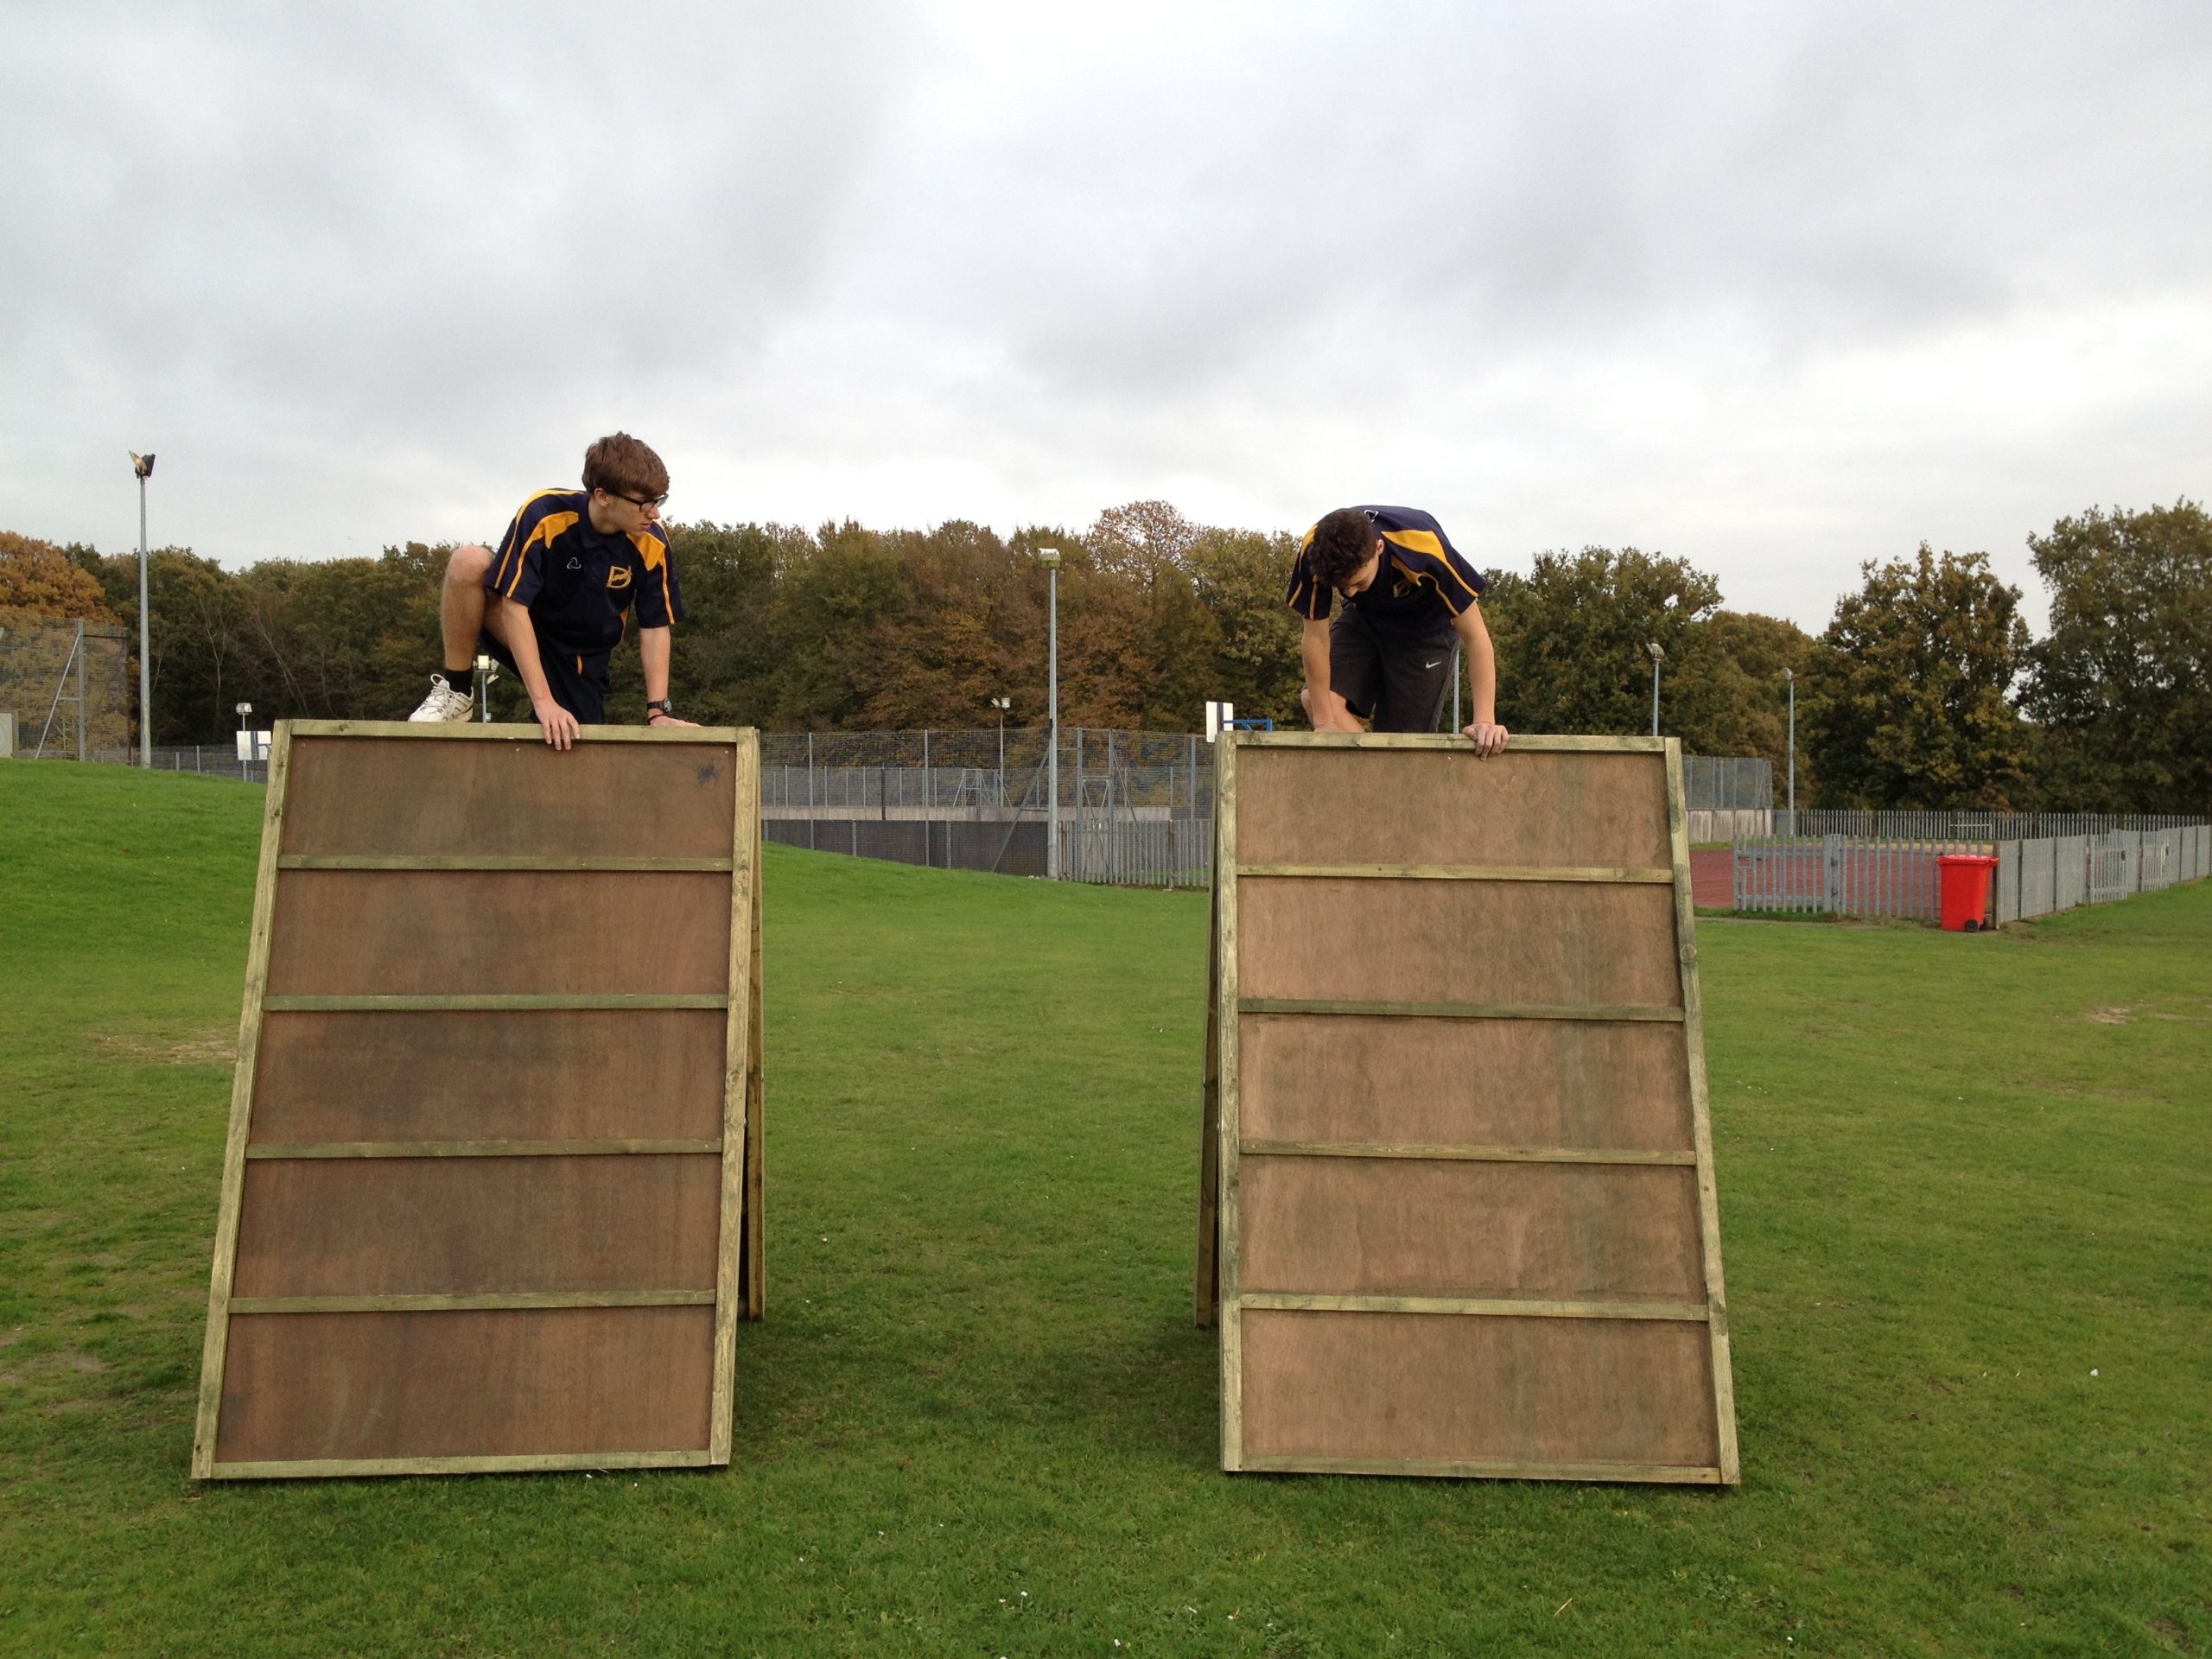 Children On Obstacle Course Equipment